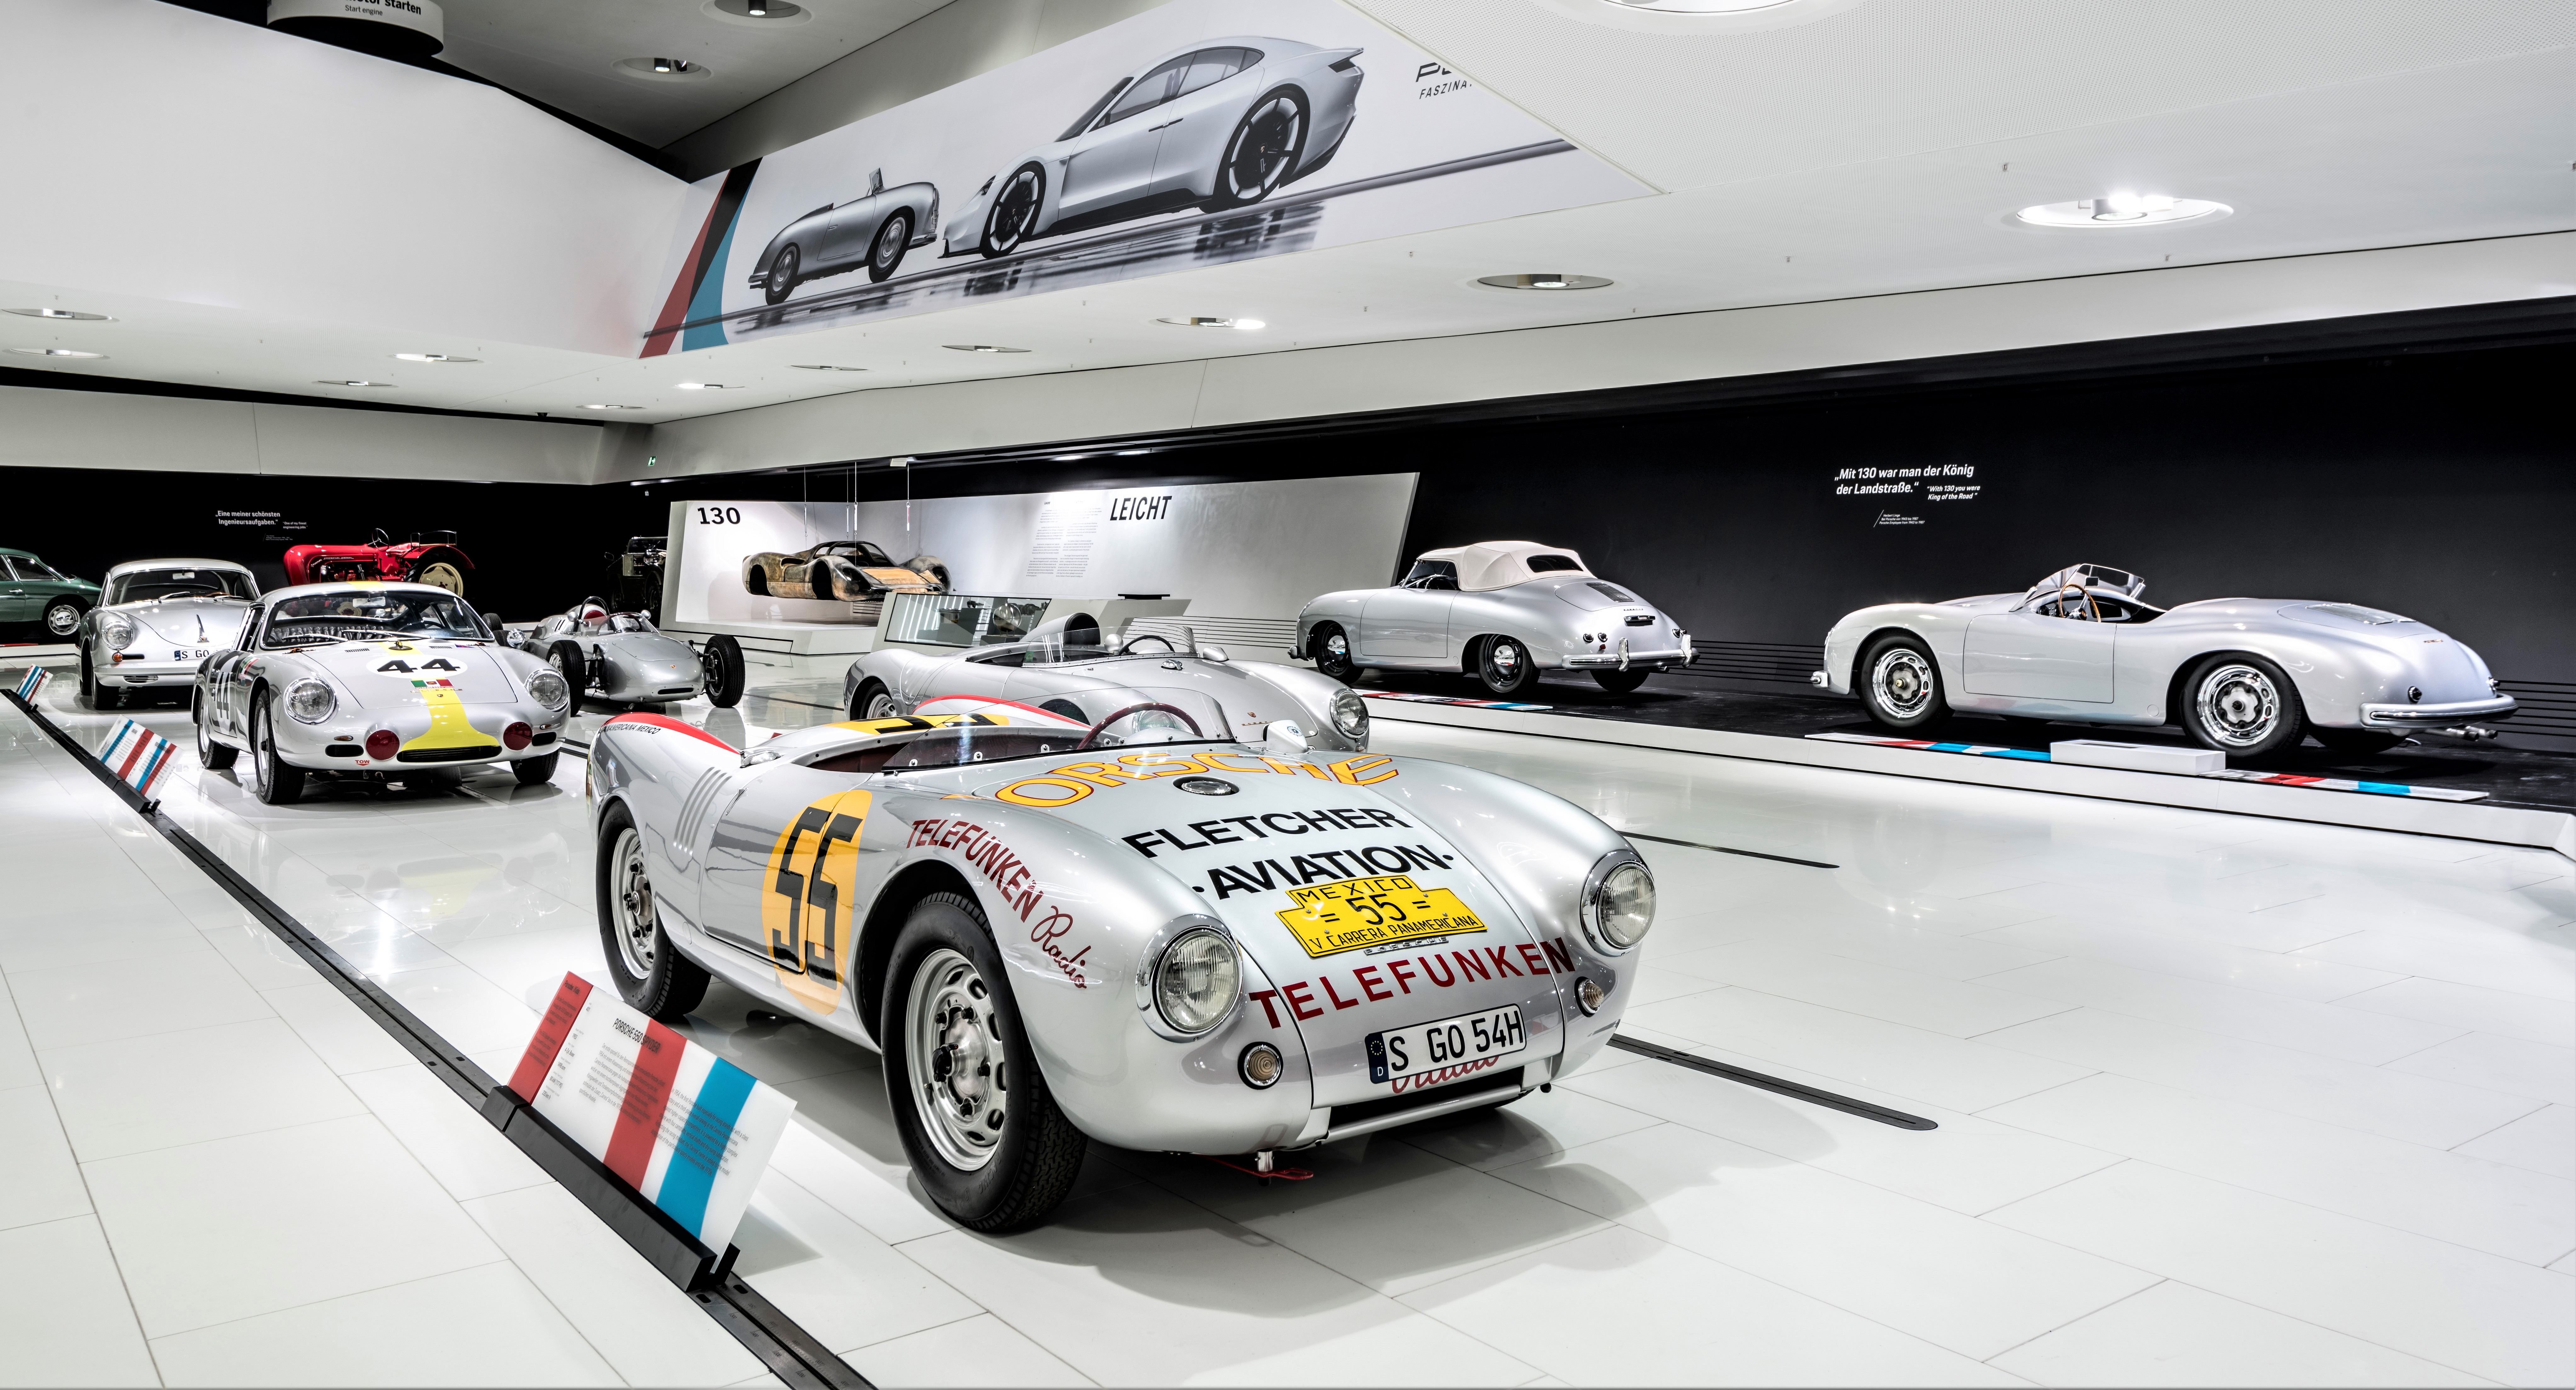 Porsches have been gathered for the Porsche Museum show 